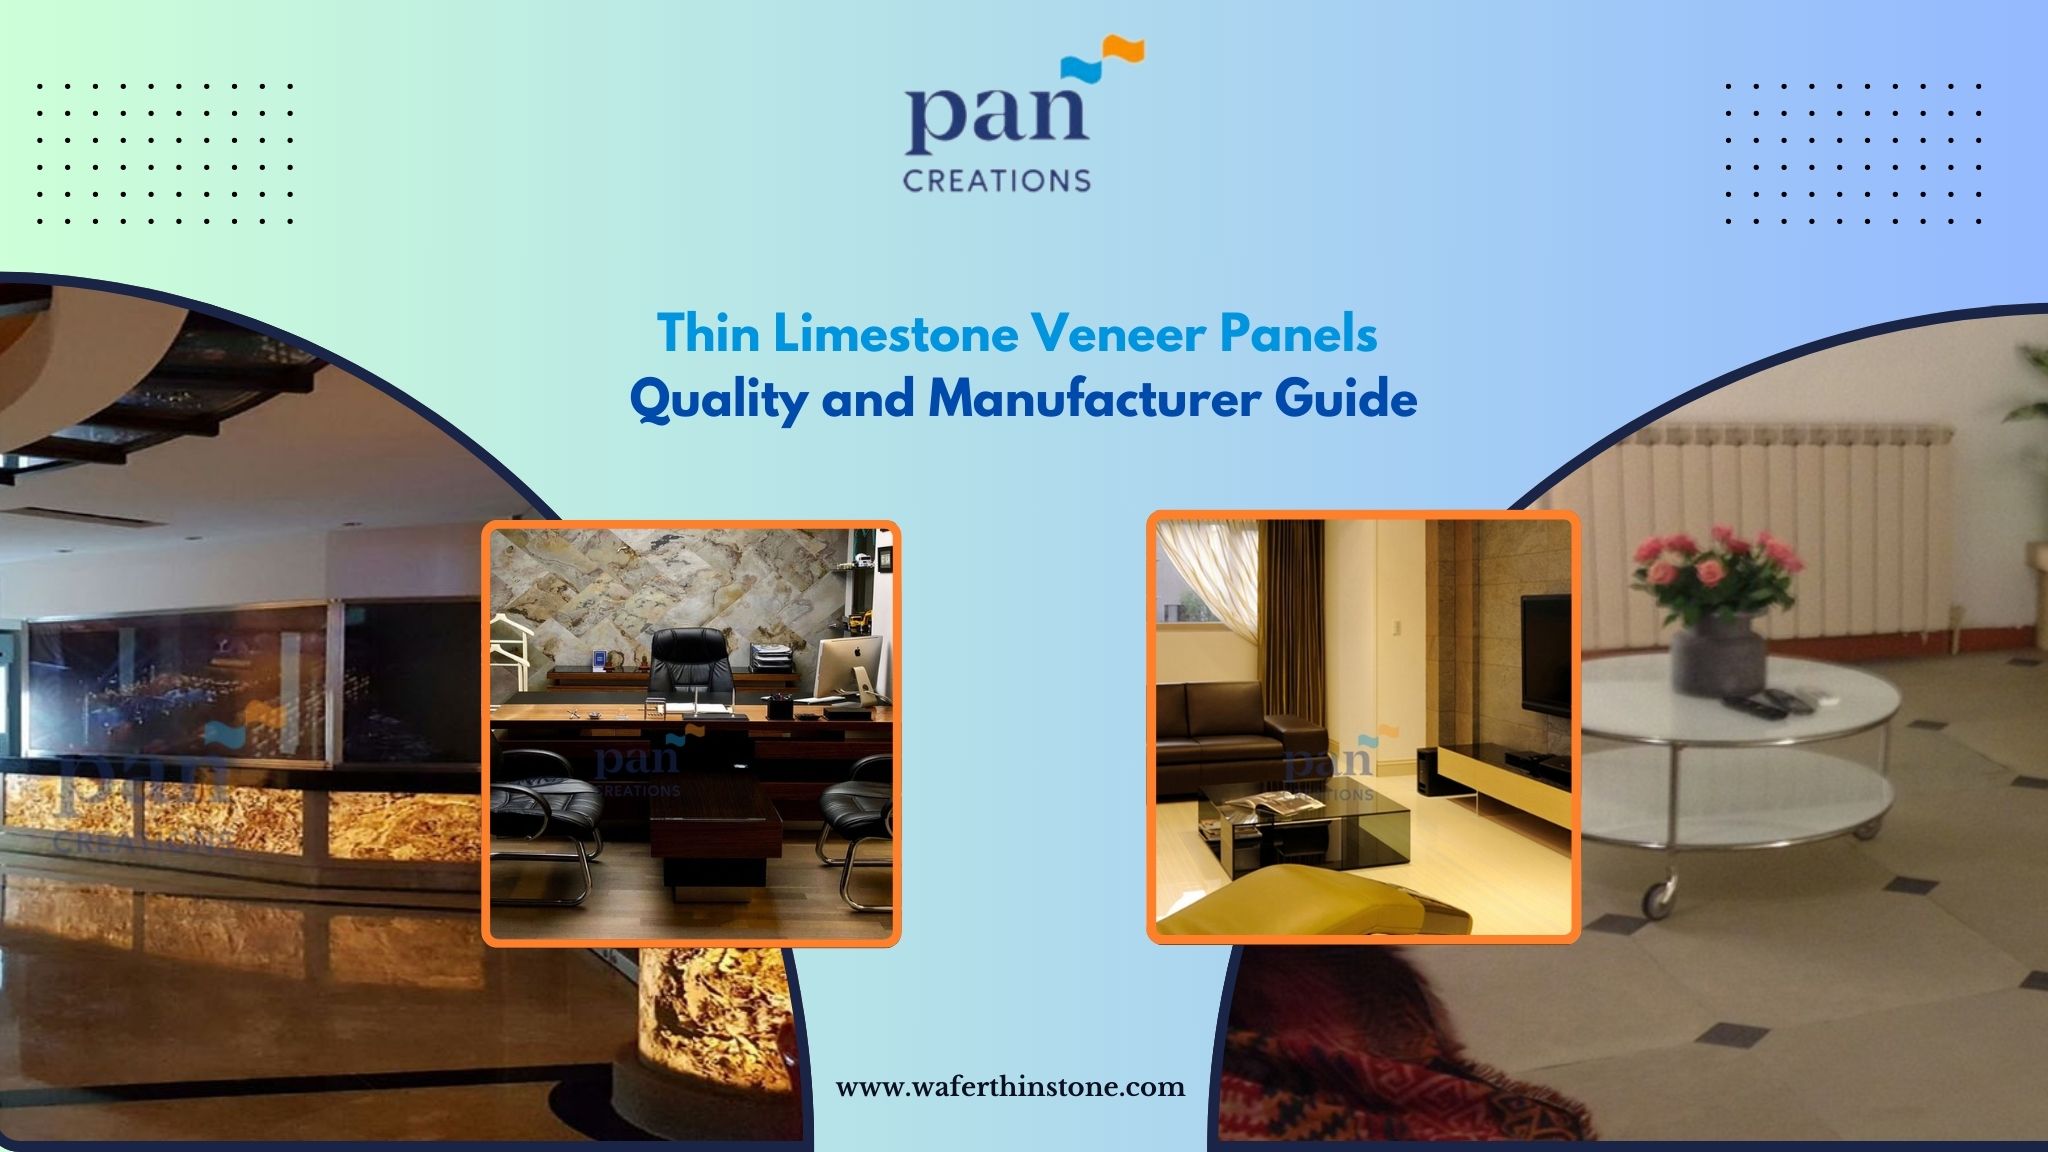 Thin Limestone Veneer Panels: Quality and Manufacturer Guide